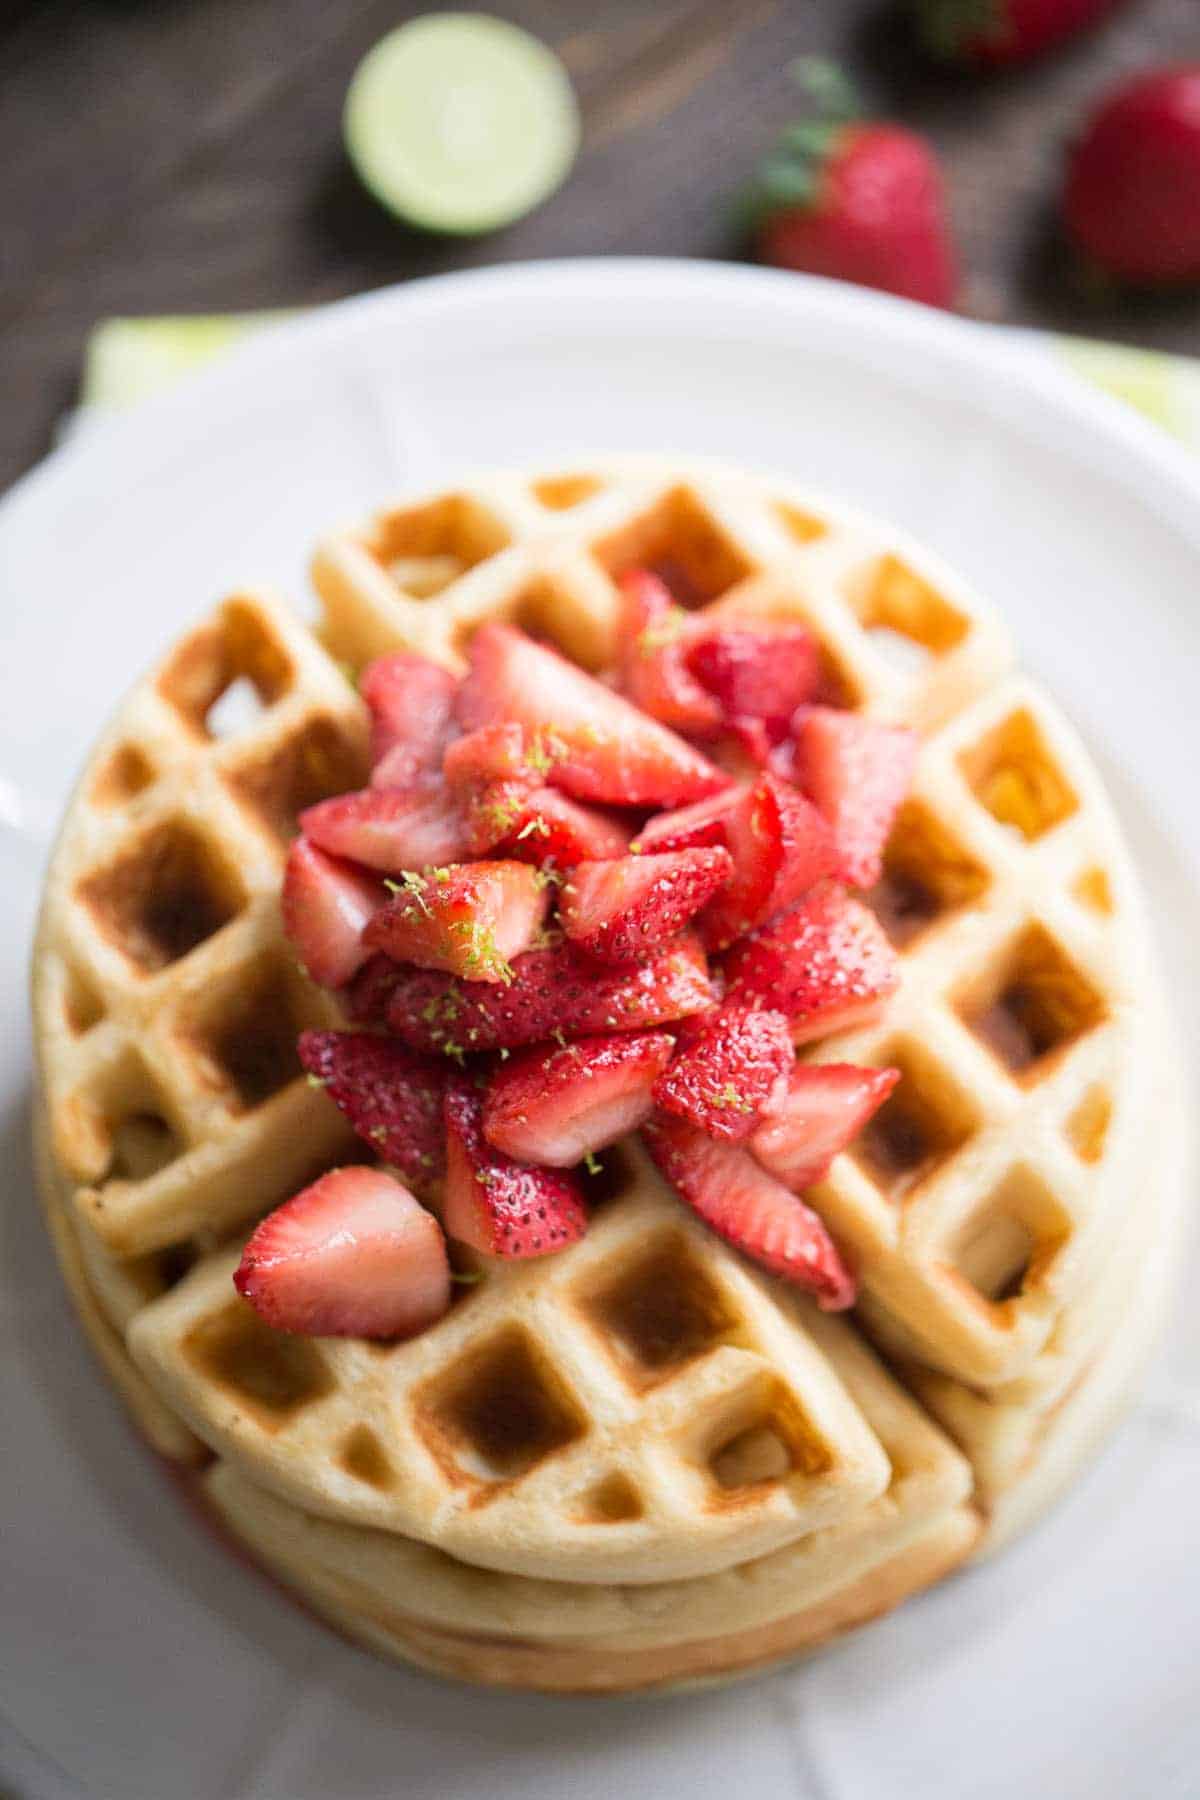 This easy homemade waffles recipe gets a tangy kick from key lime and is served with a sweet strawberry topping.